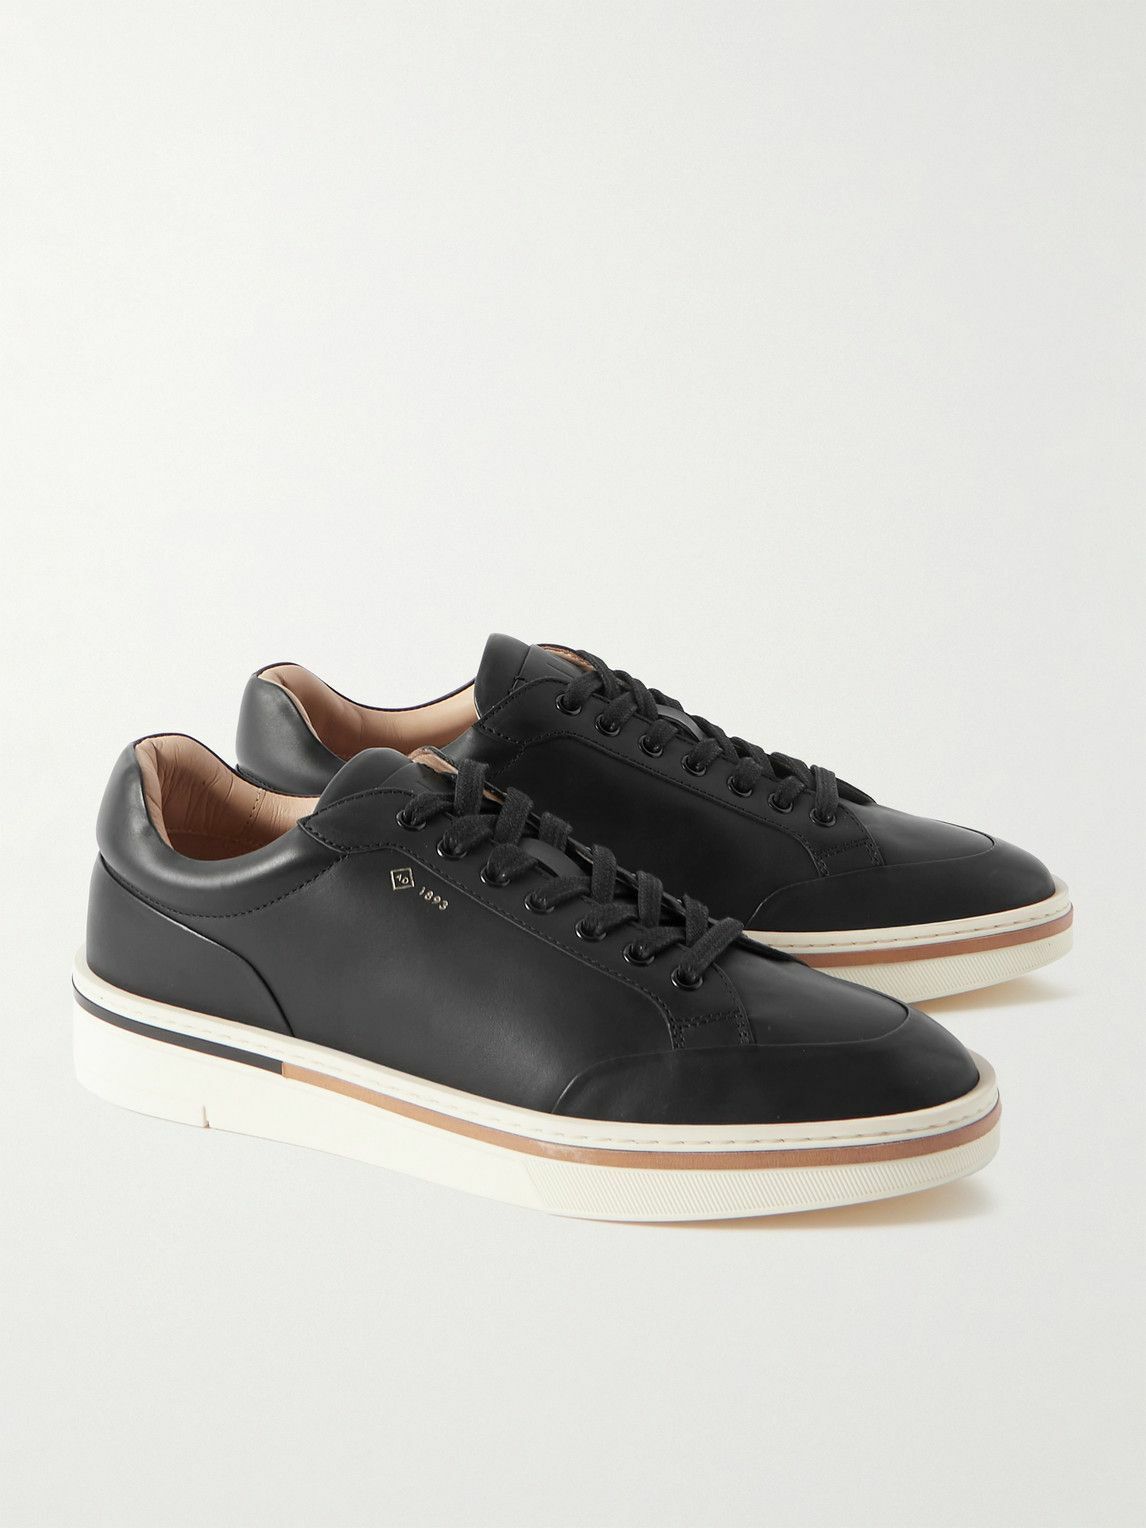 Dunhill - Metropolitan Leather Sneakers - Black Dunhill